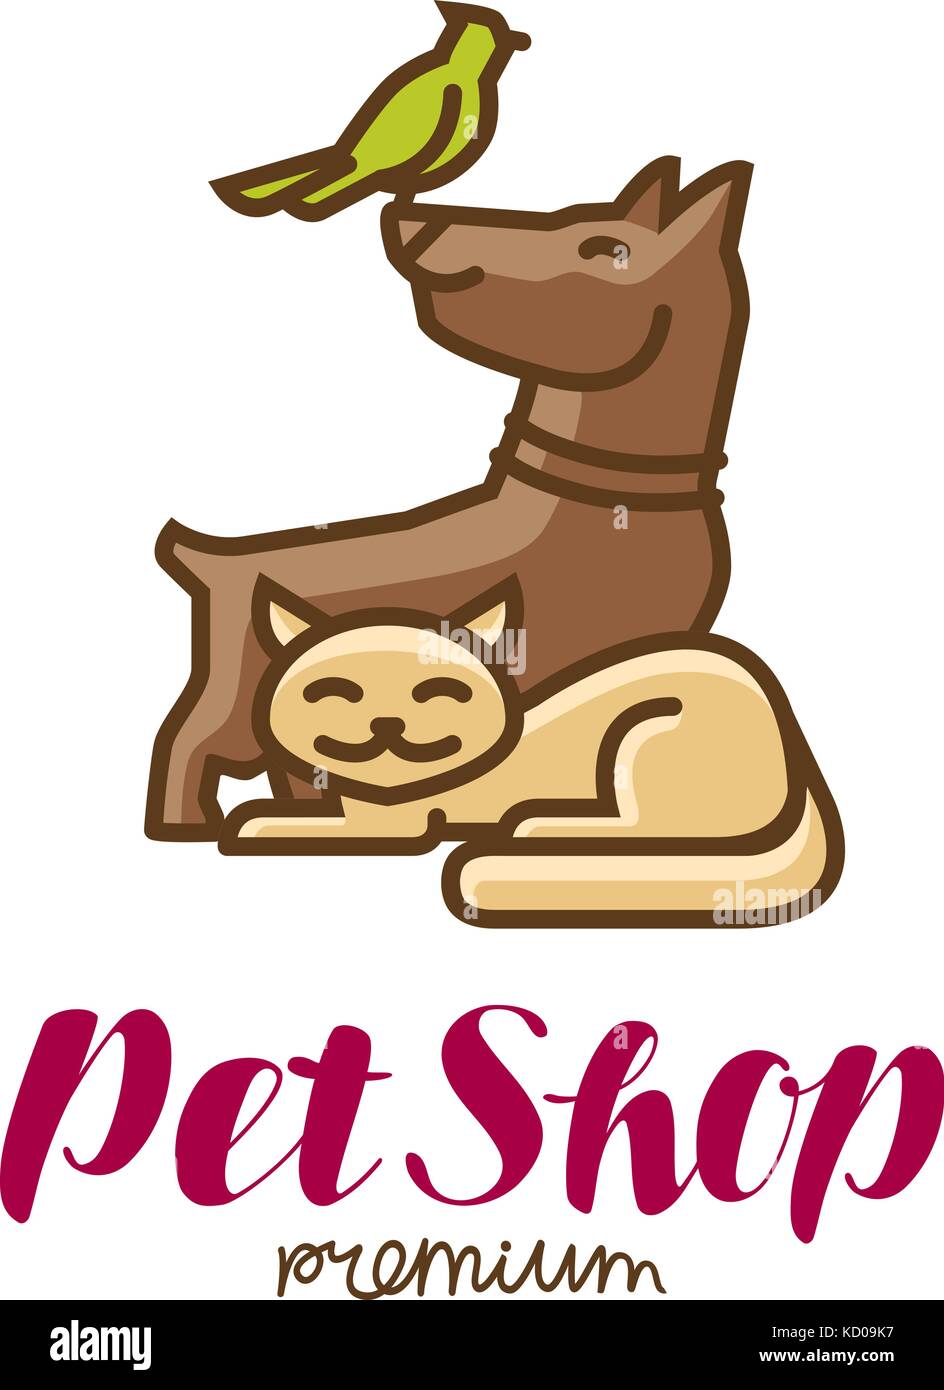 Pet shop label or logo. Animals, parrot, dog, cat icon. Vector illustration Stock Vector